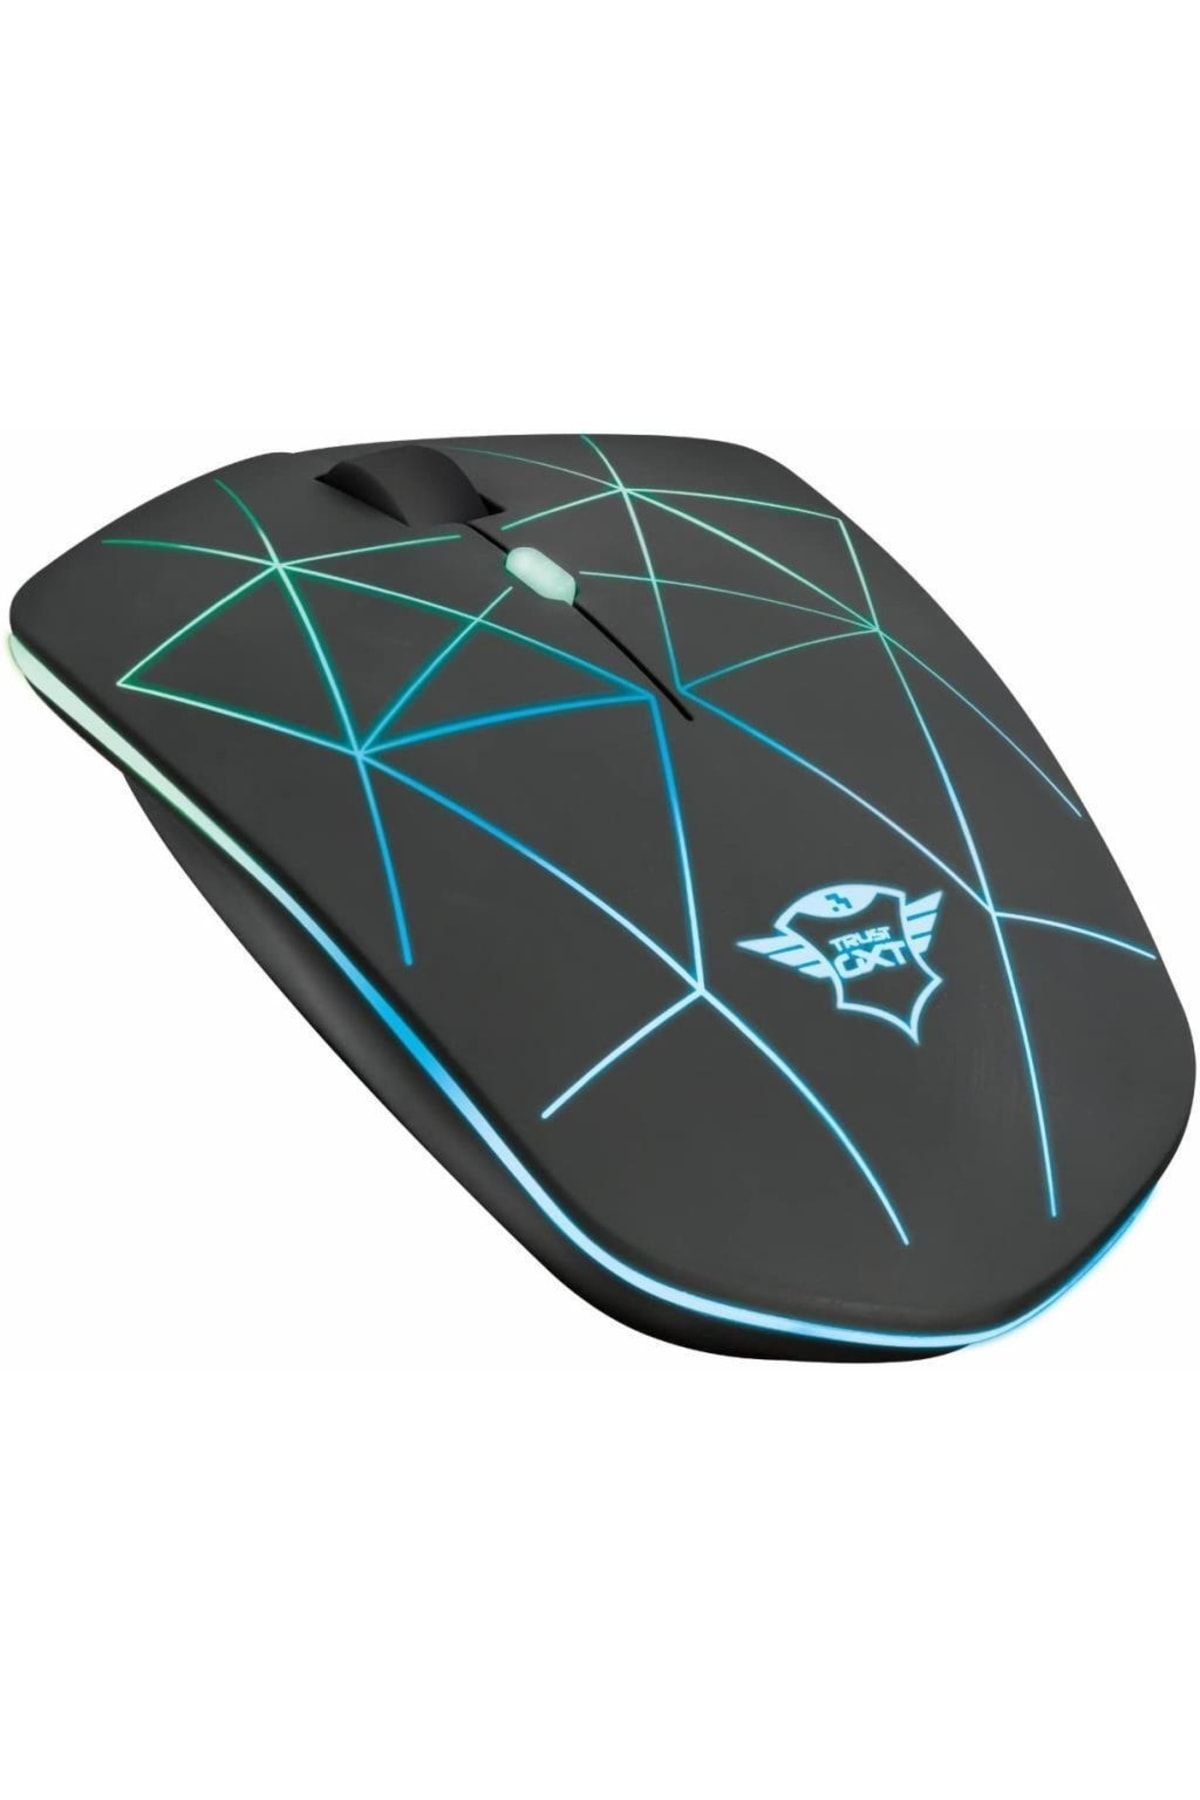 Trust 22625 Gaming Gxt 117 Strike Wireless Mouse, 600-1400 Dpi